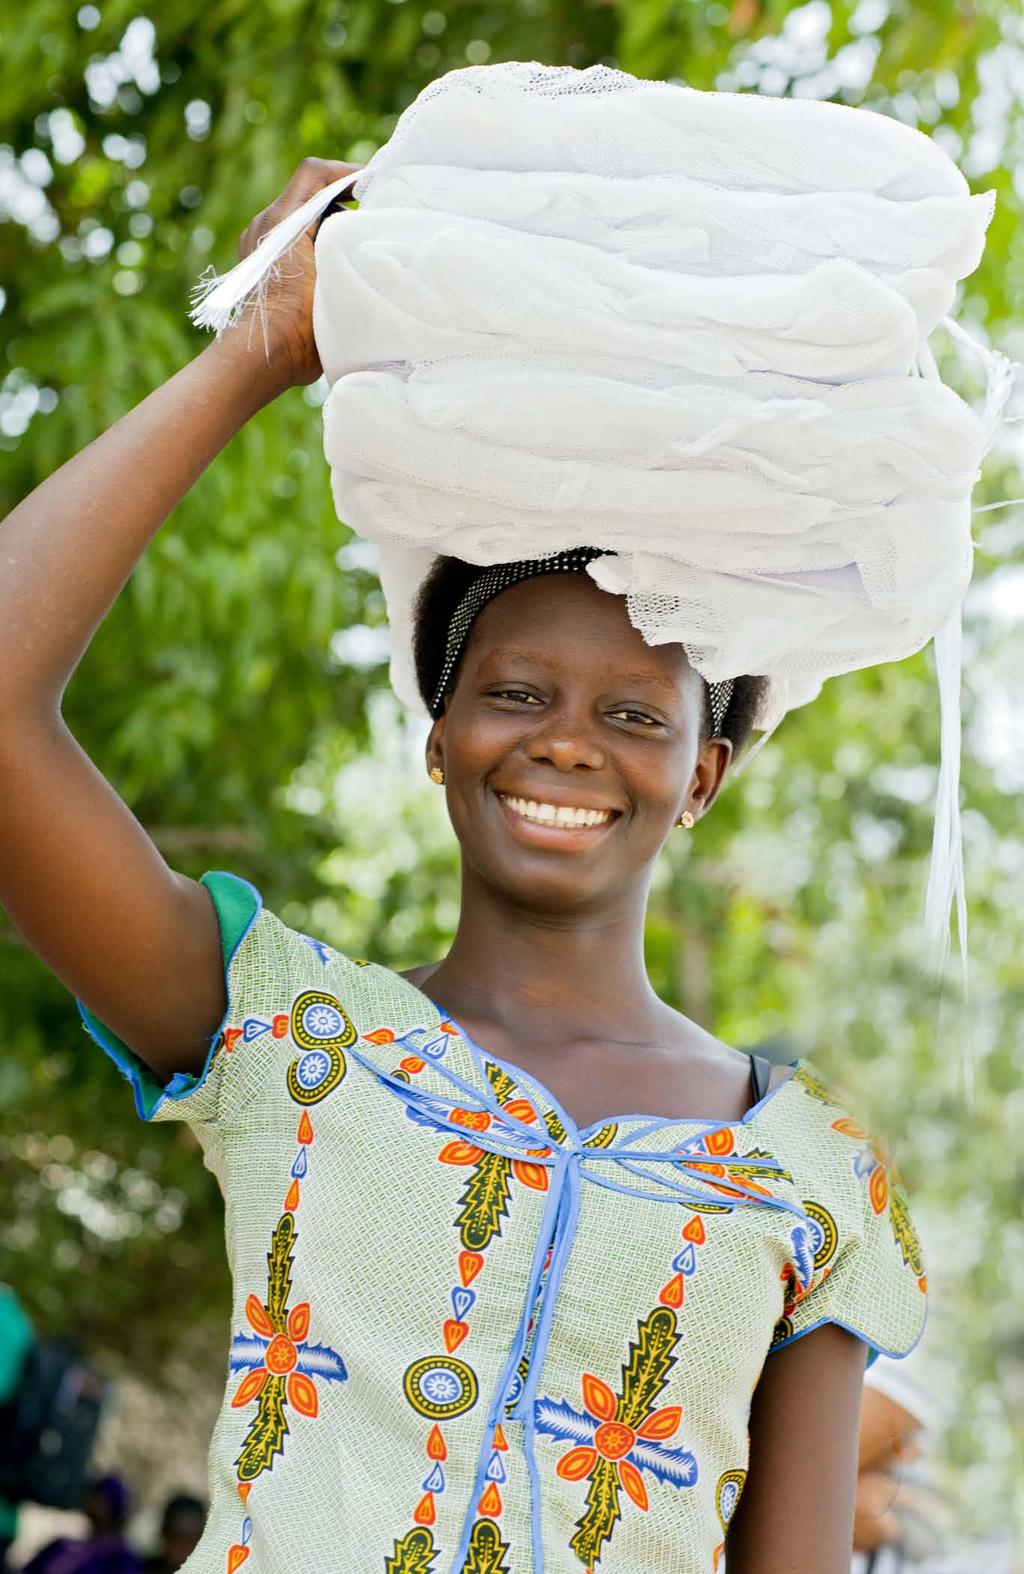 July 2013 SENEGAL A woman in Senegal carries the mosquito nets she received from the National Malaria Control Programme's (NMCP) Universal Coverage campaign with NetWorks Senegal.